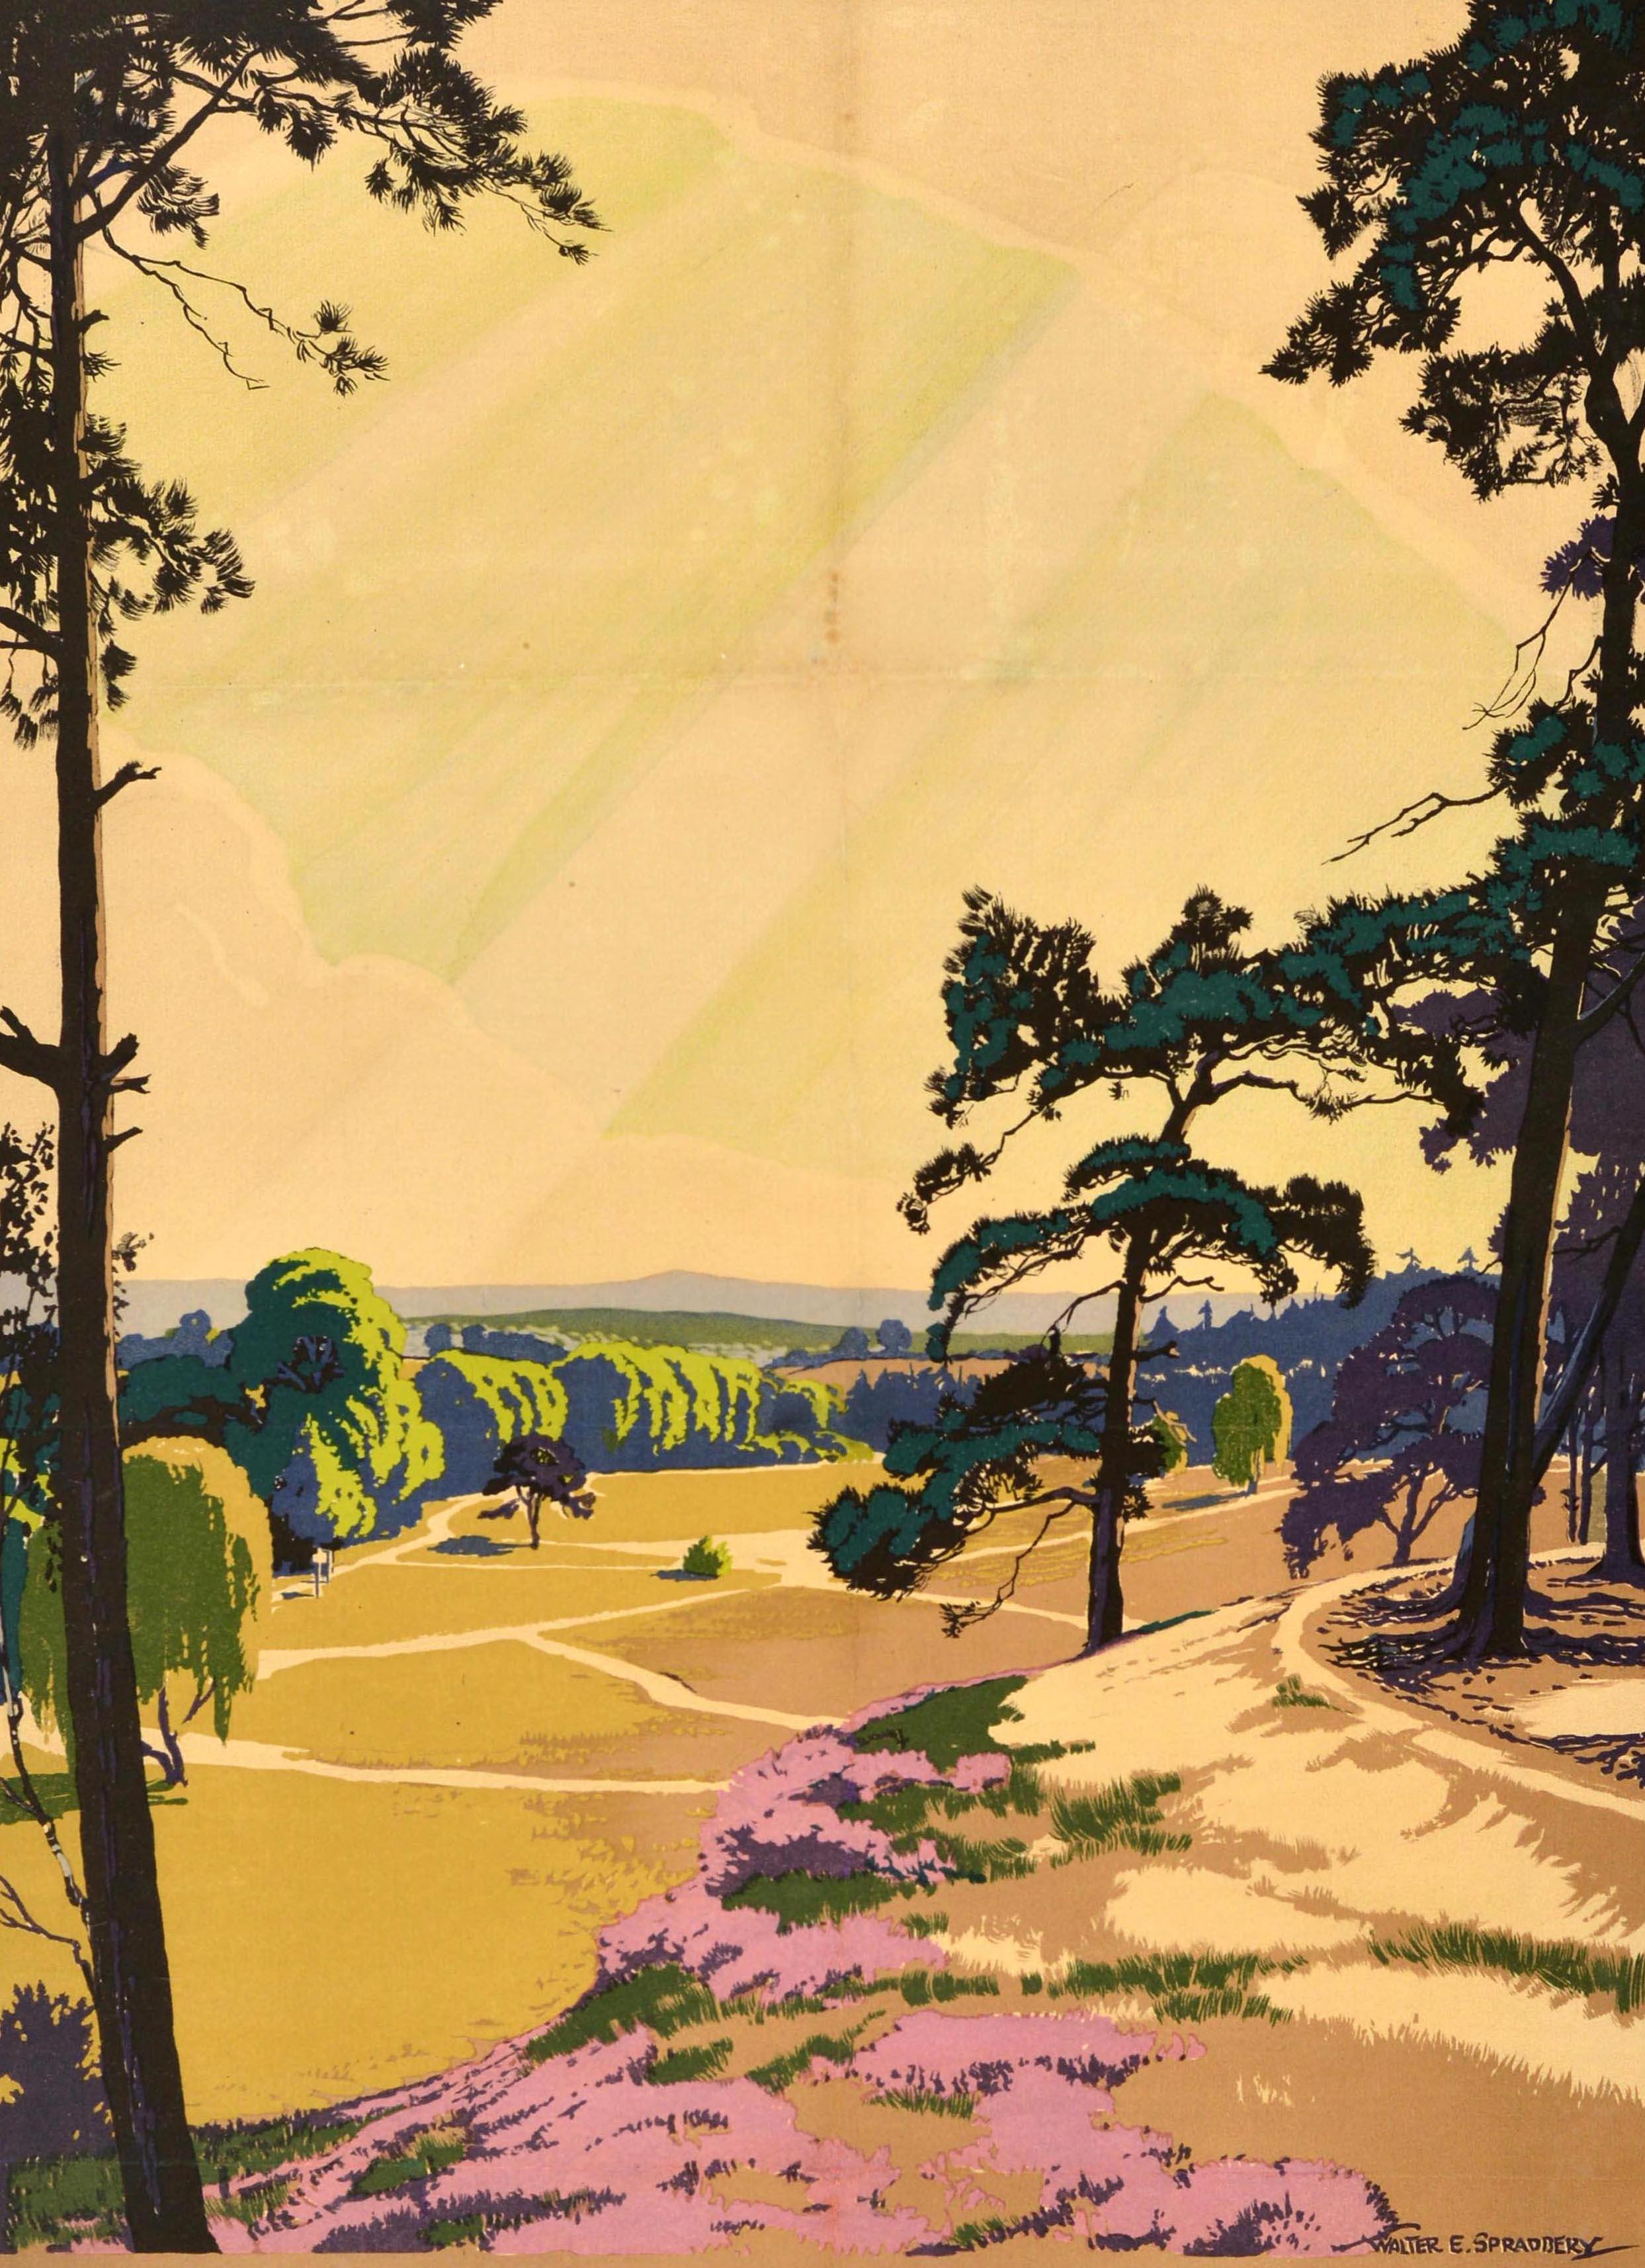 Original vintage travel advertising poster for Southern Electric featuring a scenic view by Walter E. Spradbery (1889-1969) of a peaceful Surrey landscape with paths through trees and fields, colourful heather flowers growing on the hill in the